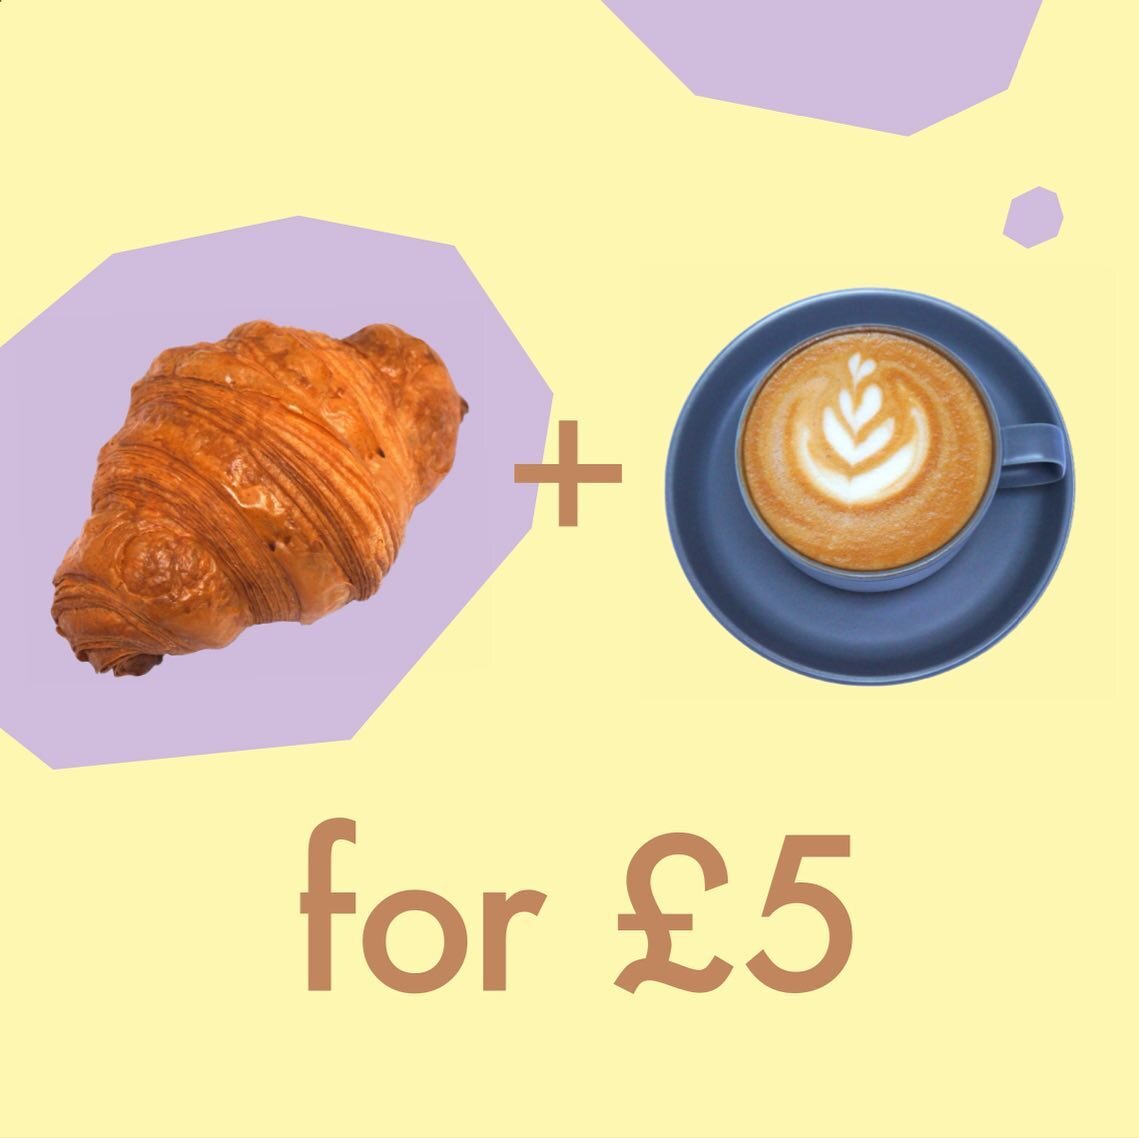 The perfect combo to cure any autumn blues 💙
ANY PASTRY AND A HOT DRINK* for a FIVER
Both in Camberwell and Marylebone. 
Available when you see the sign outside!

*hot drink may be replaced with any soft drink